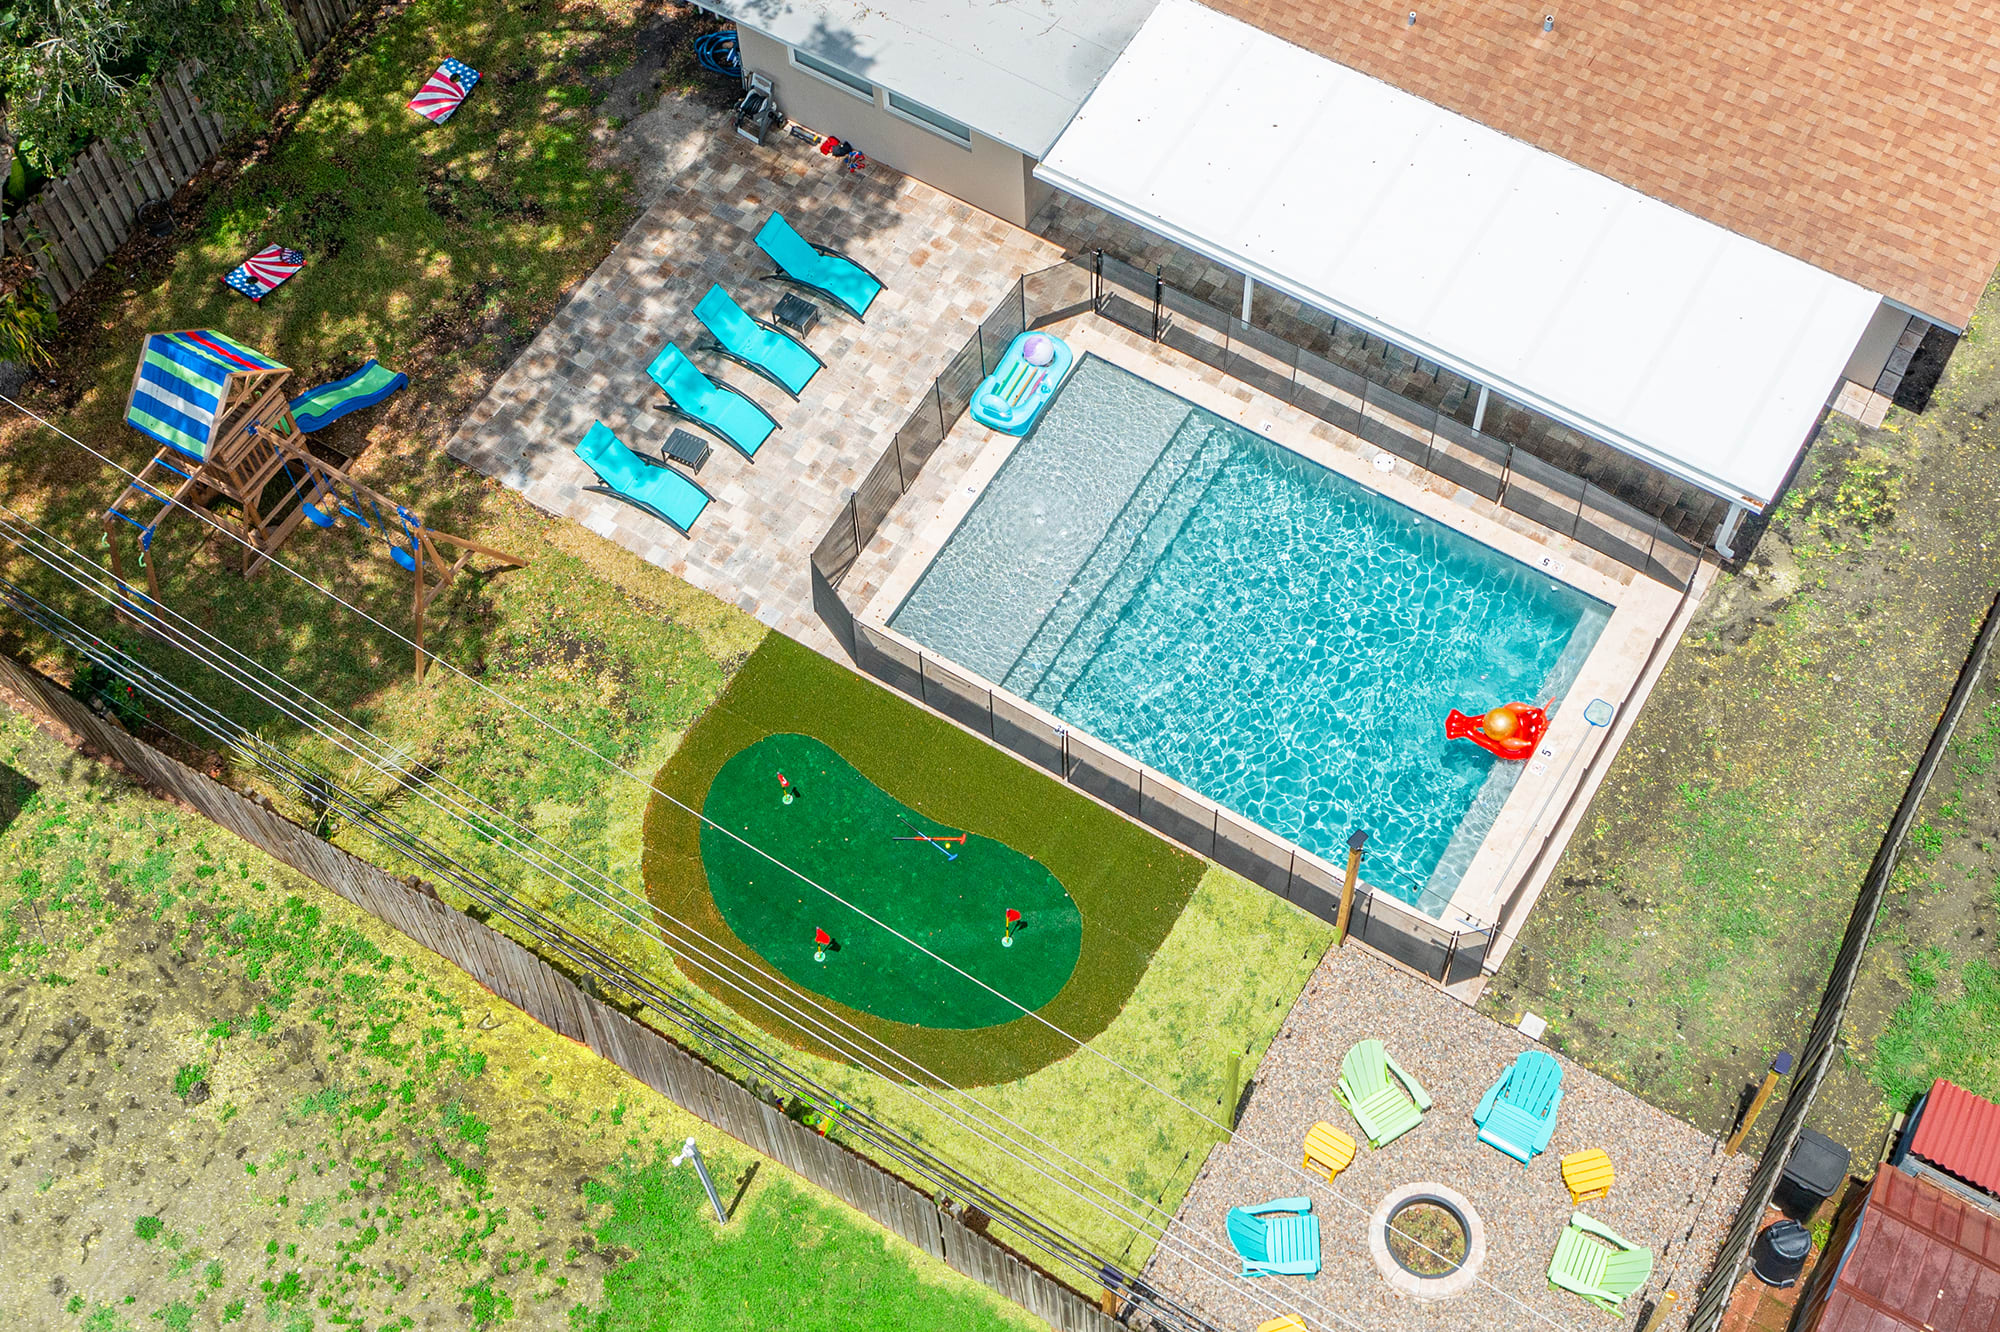 Ariel View of your Outdoor Oasis. Just 2 miles to the beach with all the cool amenities, our 4 bedroom home is perfect for your group.